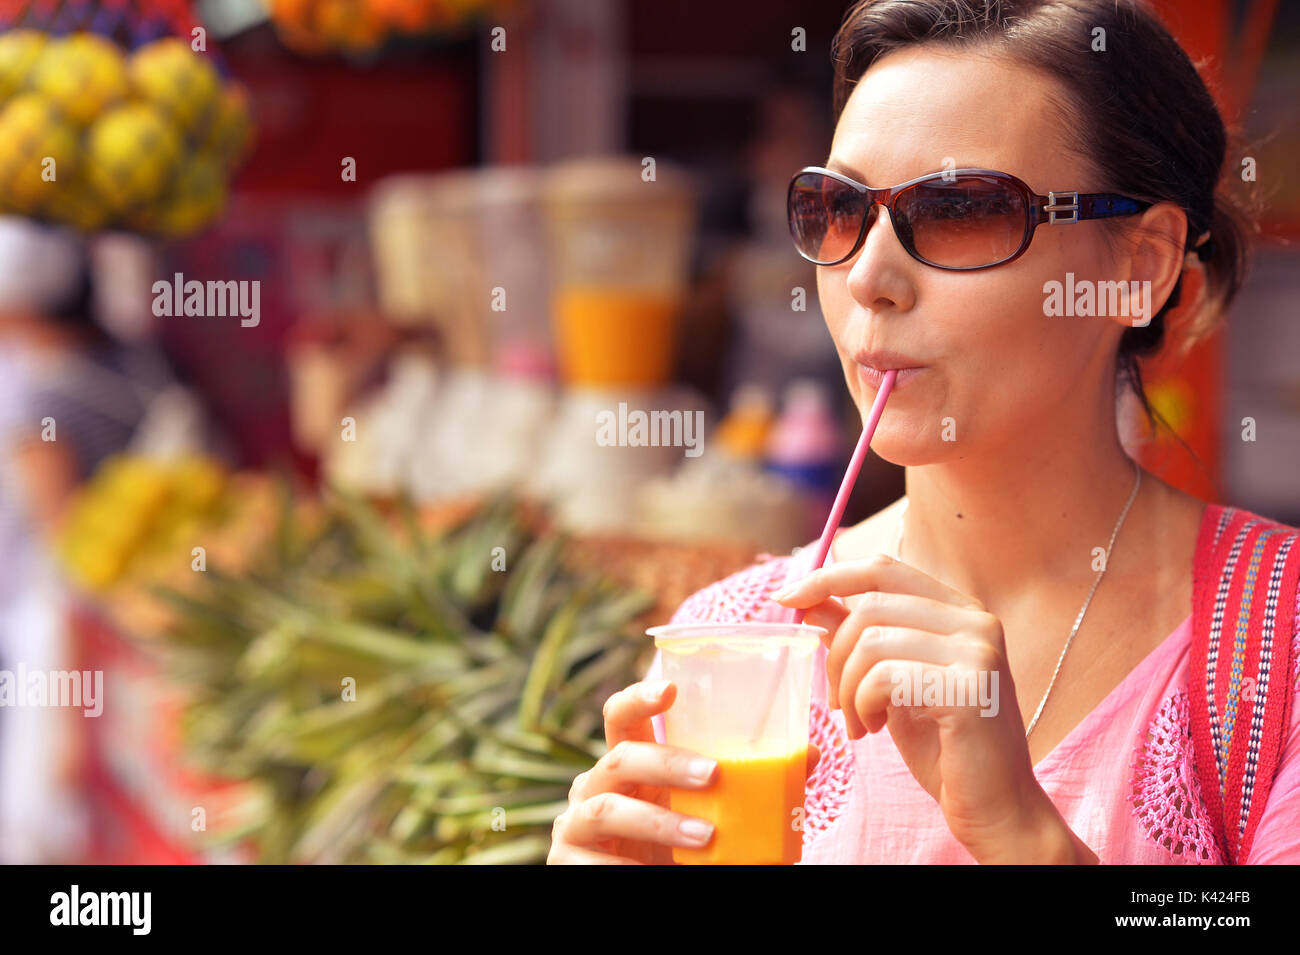 young woman drinking   Stock Photo